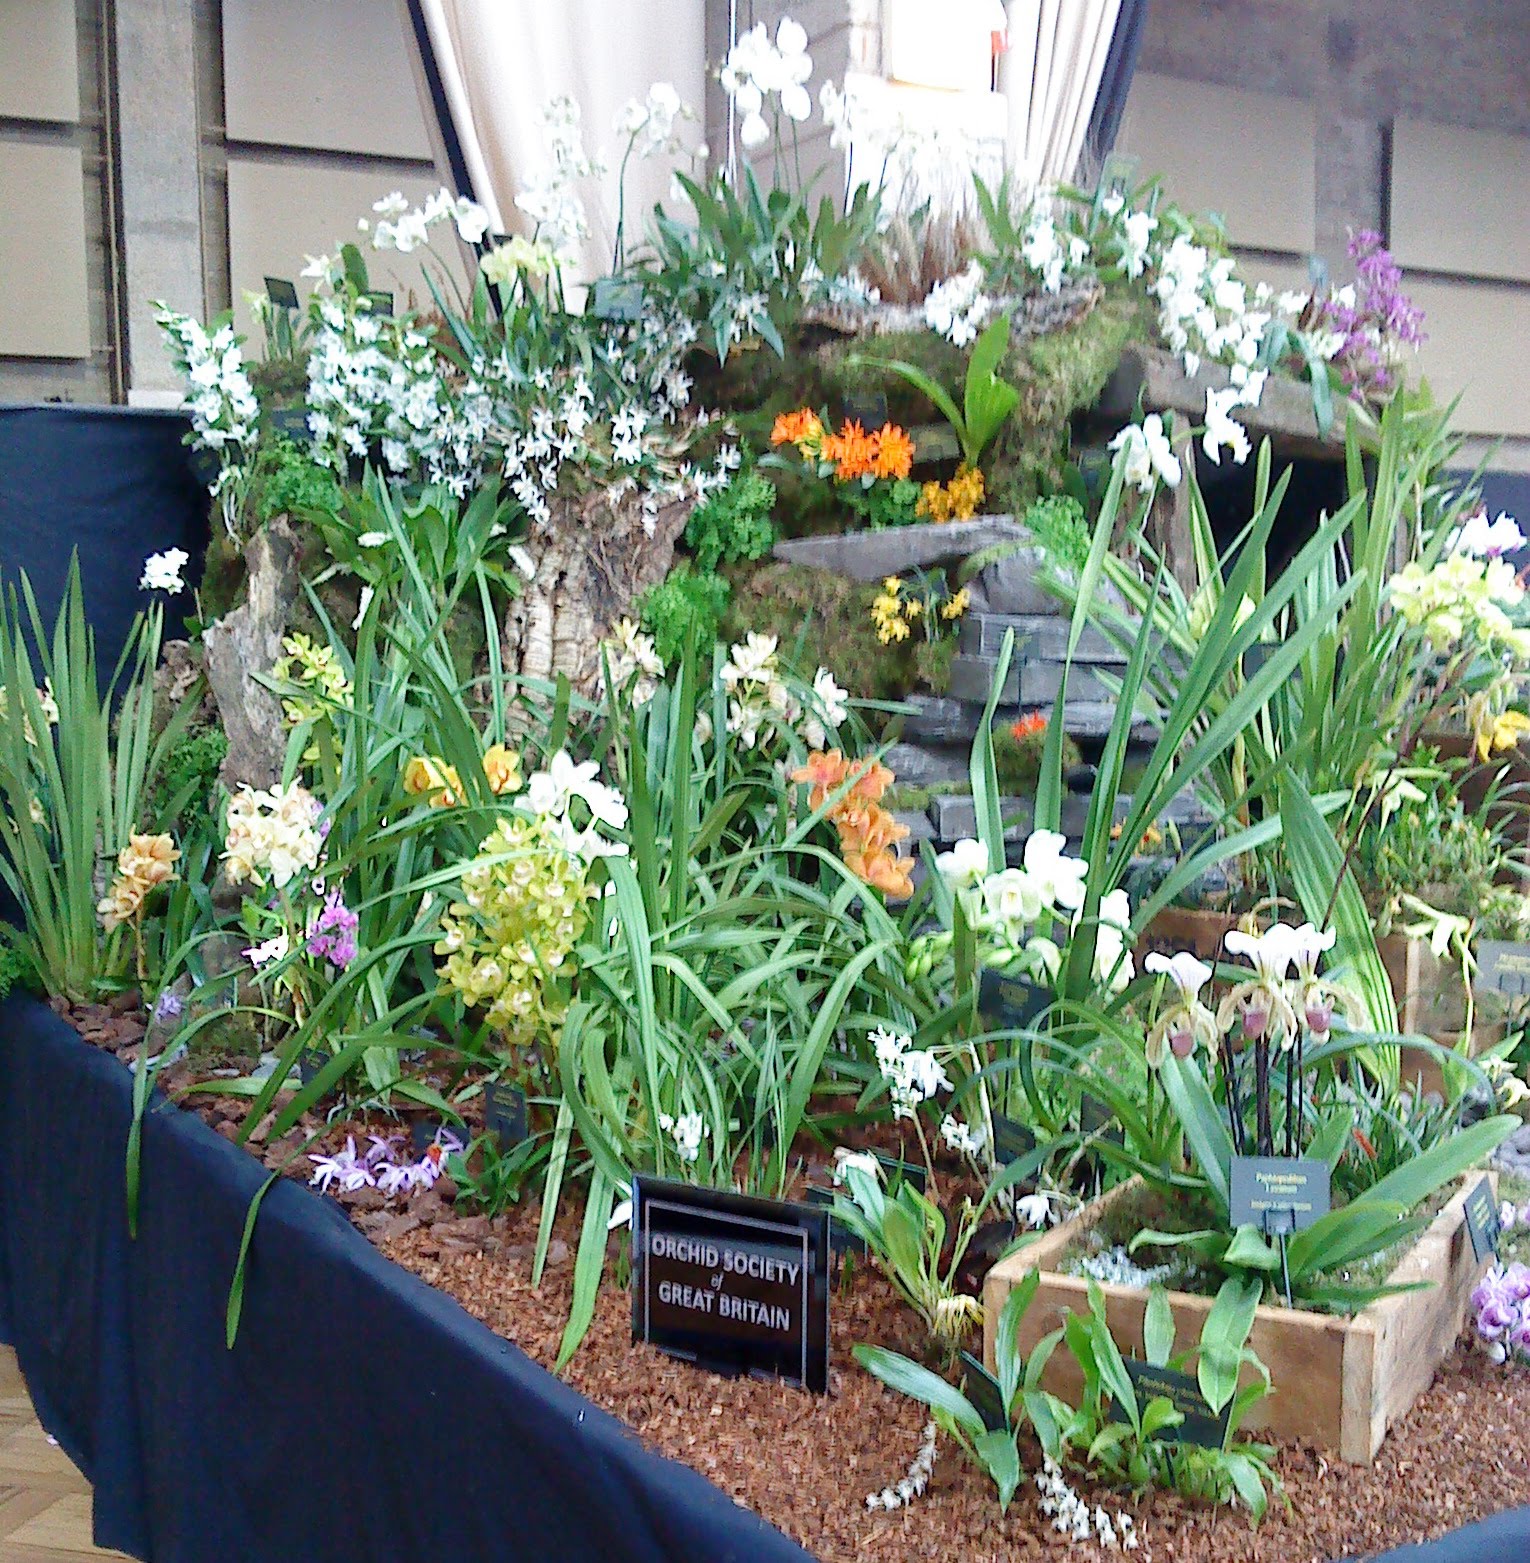 The Gardengoer A Day at the London Orchid Show